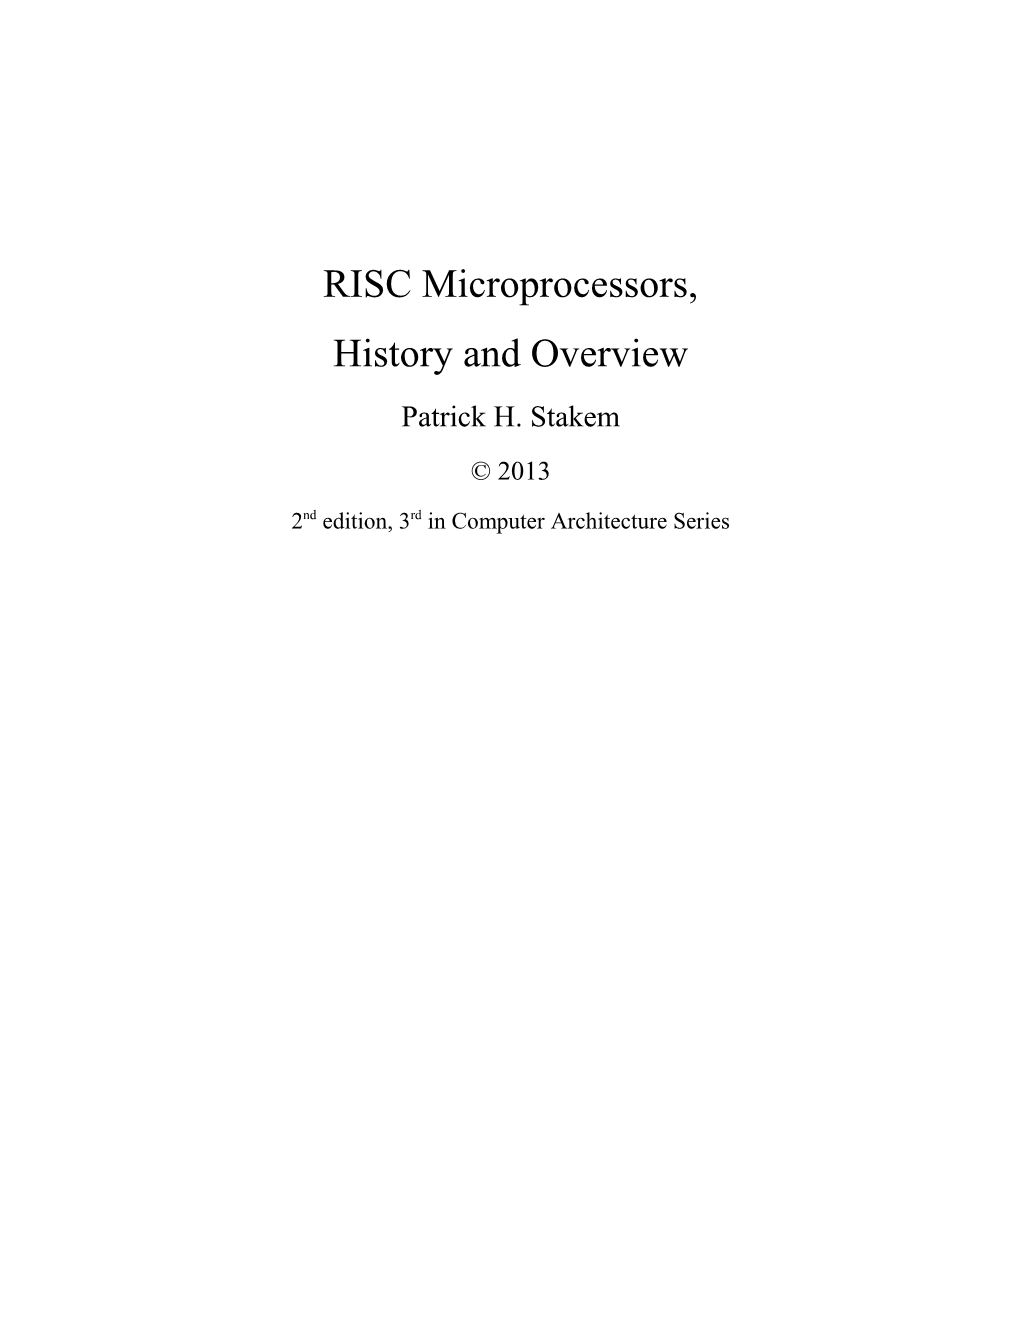 RISC Microprocessors, History and Overview Patrick H